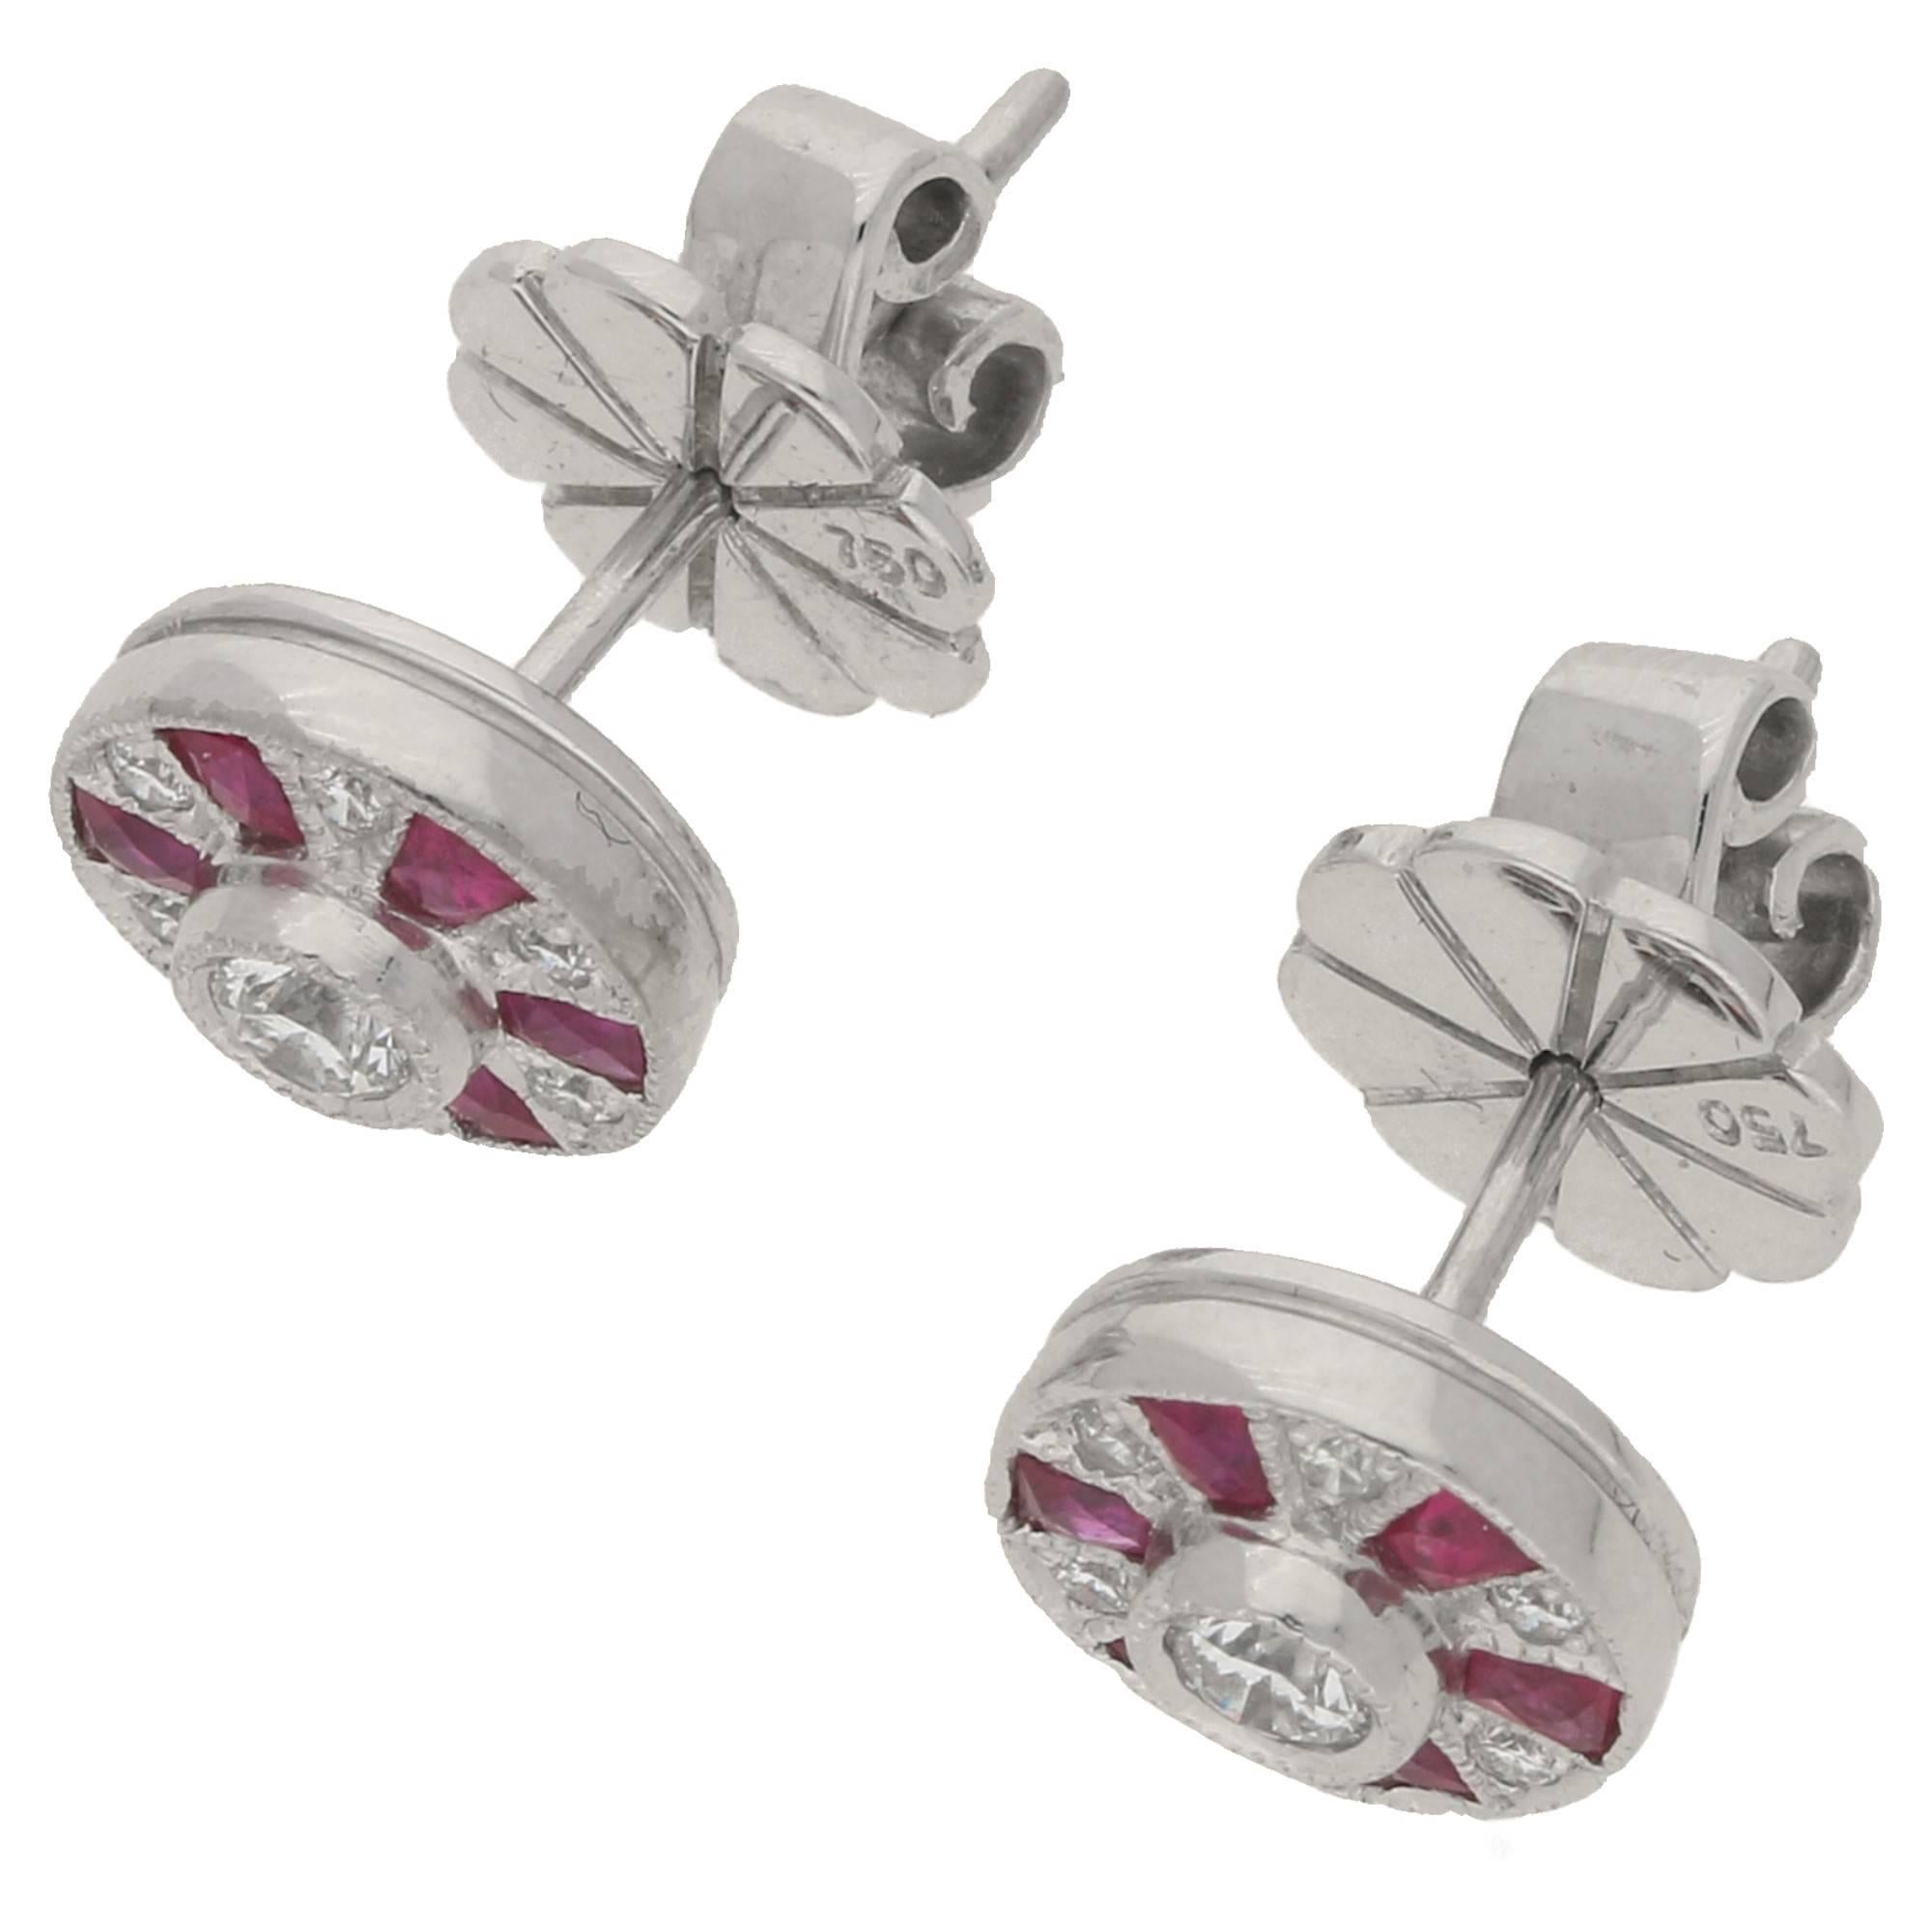 The studs are in 18ct white gold and are set with 0.55cts of ruby and 0.23 carats of diamond. Fitted with post and butterfly backs.